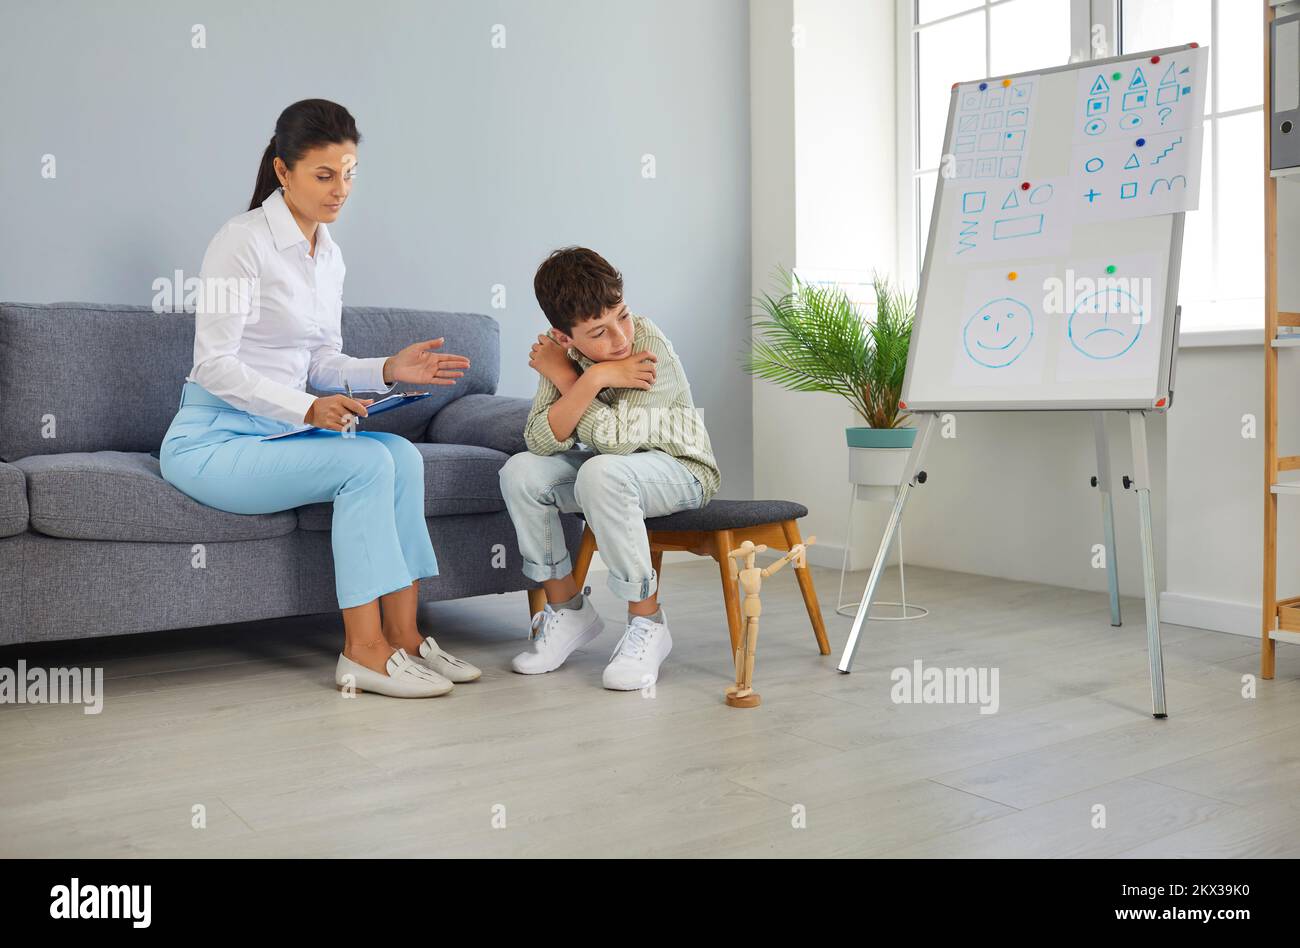 School teacher, counselor or psychologist communicating with sad, depressed child Stock Photo